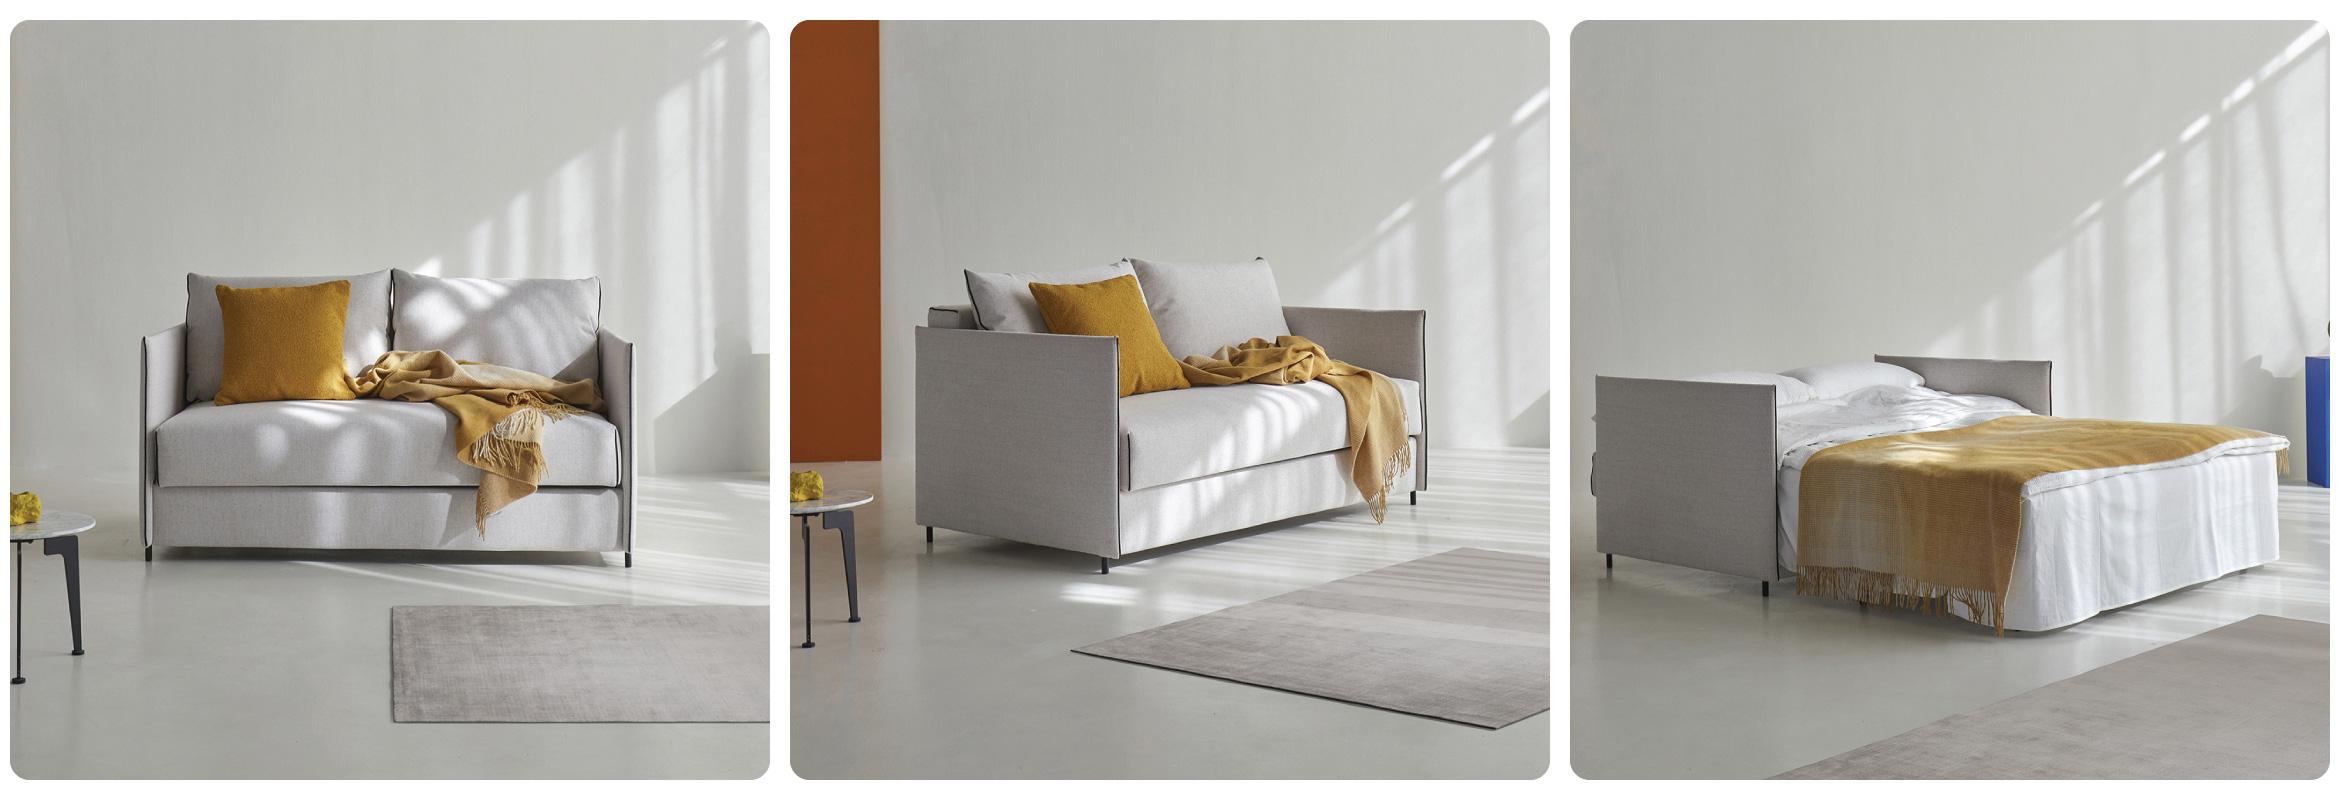 luoma sofa bed